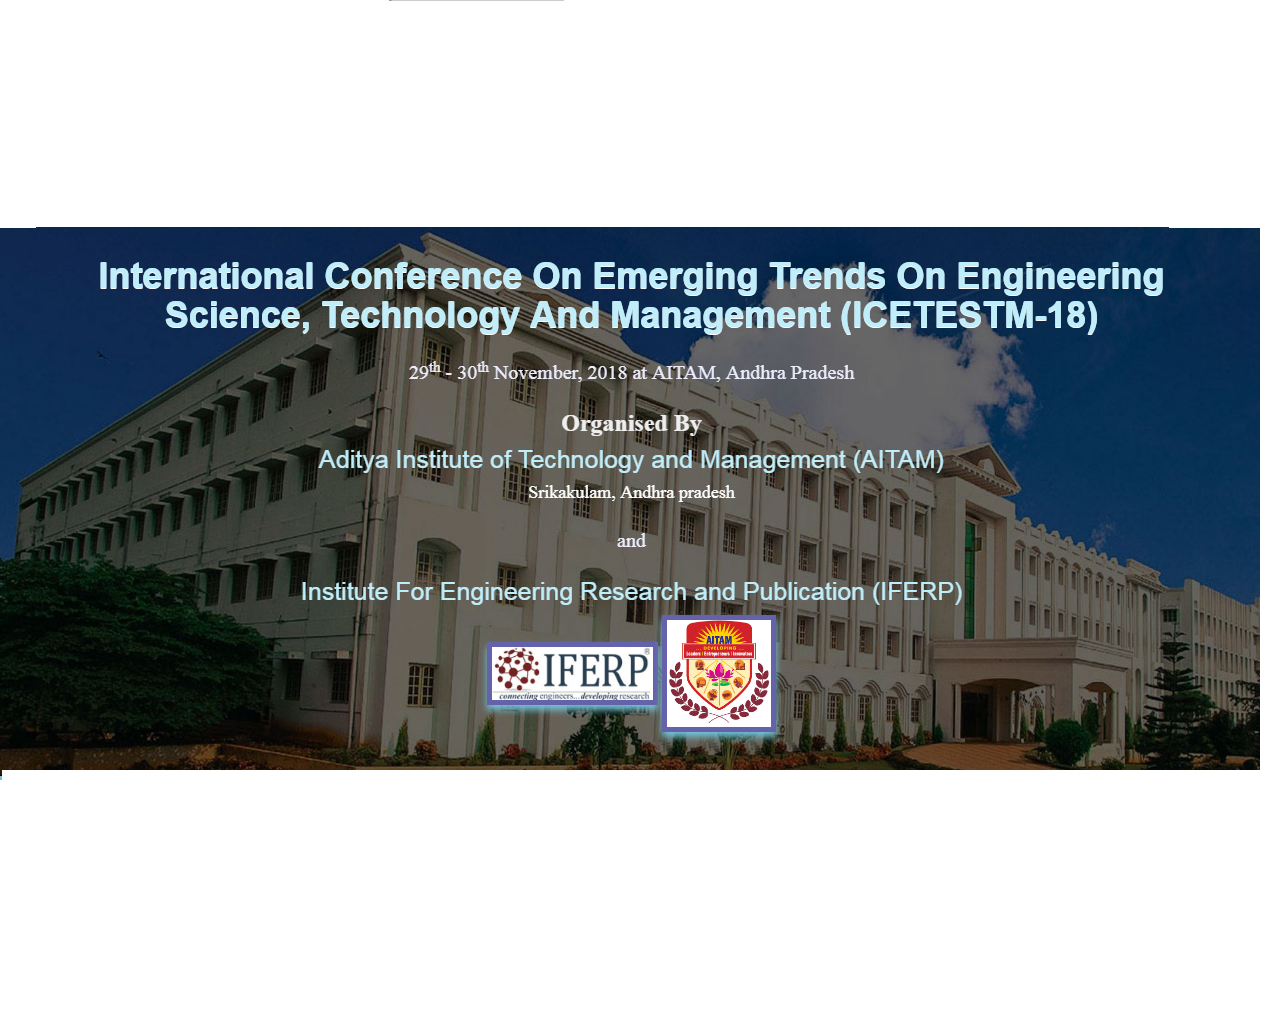 International Conference On Emerging Trends On Engineering Science, Technology And Management (ICETESTM-18), Srikakulam, Andhra Pradesh, India